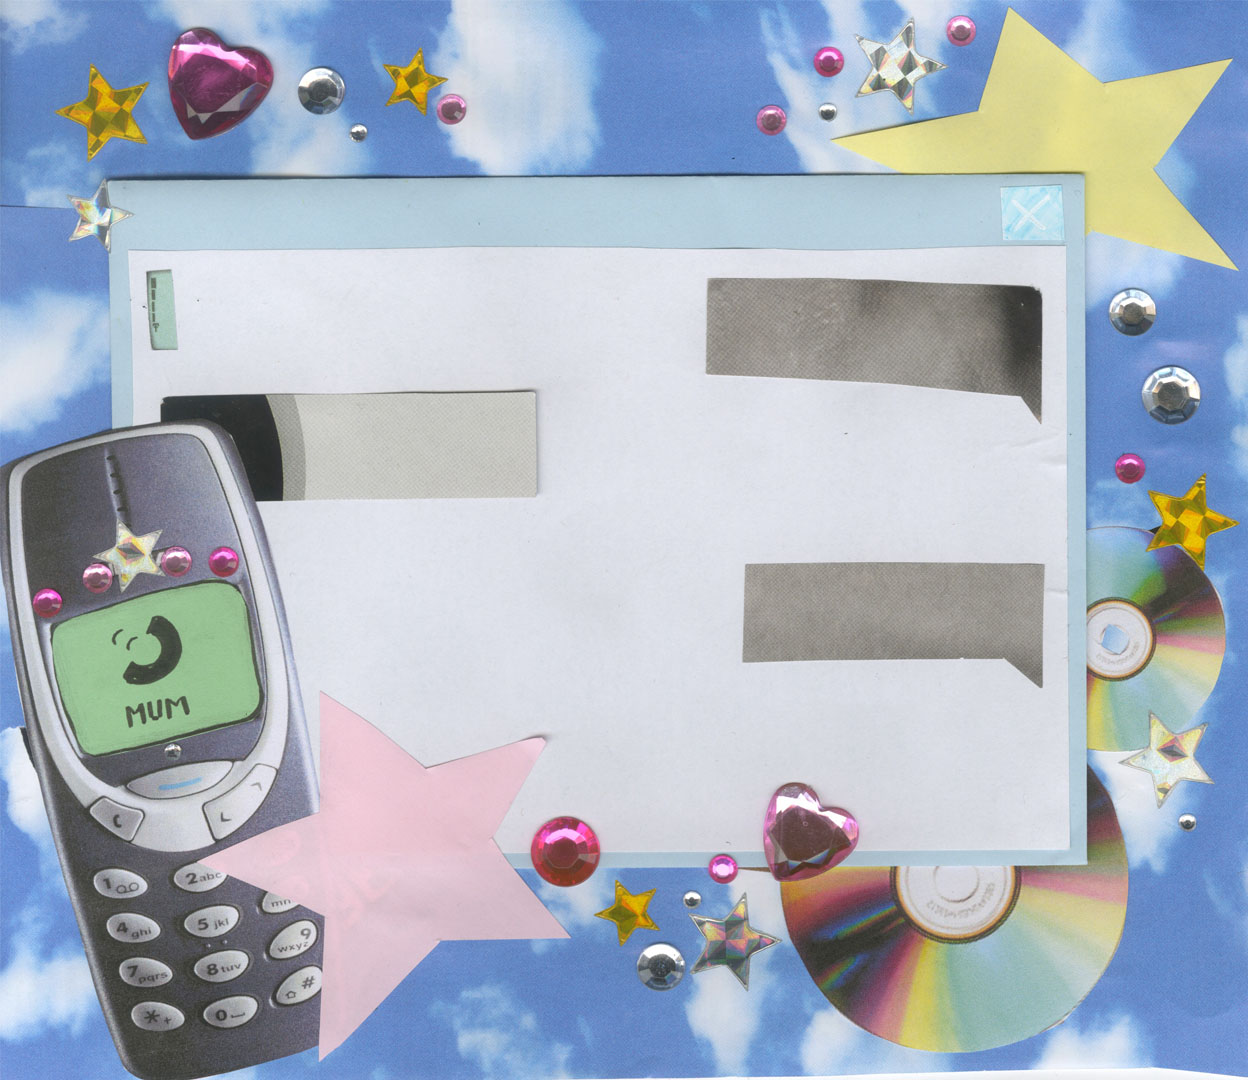 Collage of objects including mobile phone, CDs, stars and heart-shaped balloons